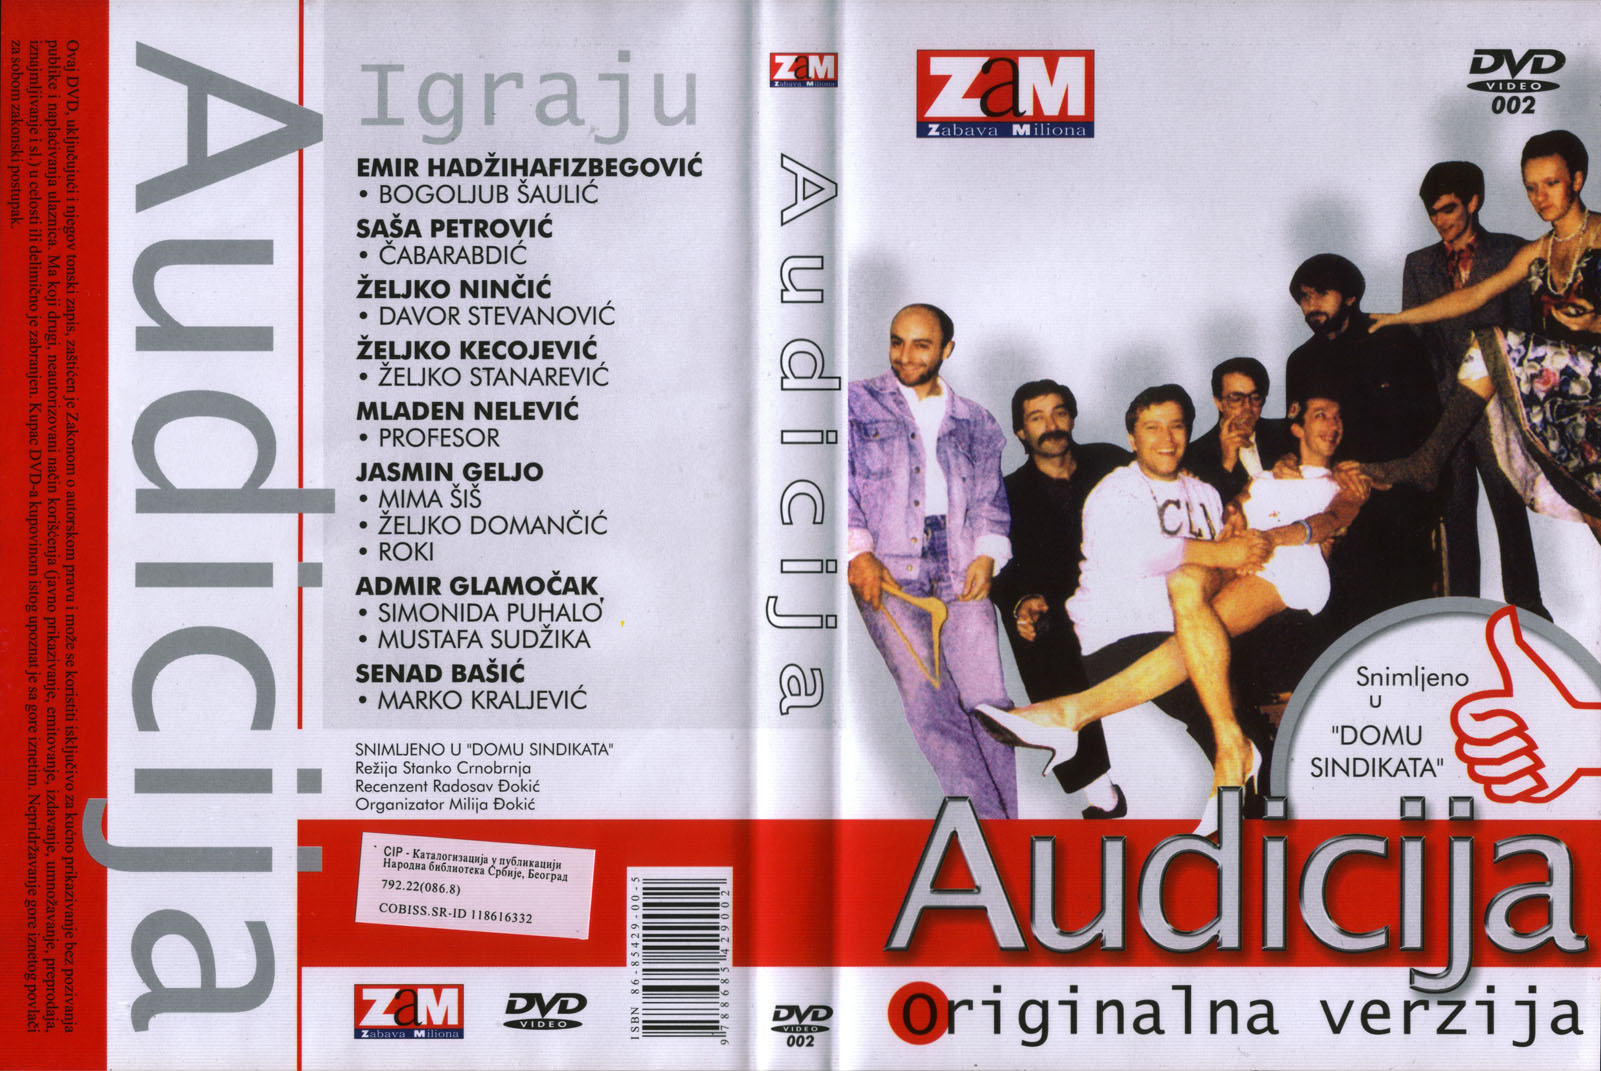 Click to view full size image -  DVD Cover - A - DVD - AUDICIJA DOM SINDIKATA.jpg - DVD - AUDICIJA DOM SINDIKATA.jpg